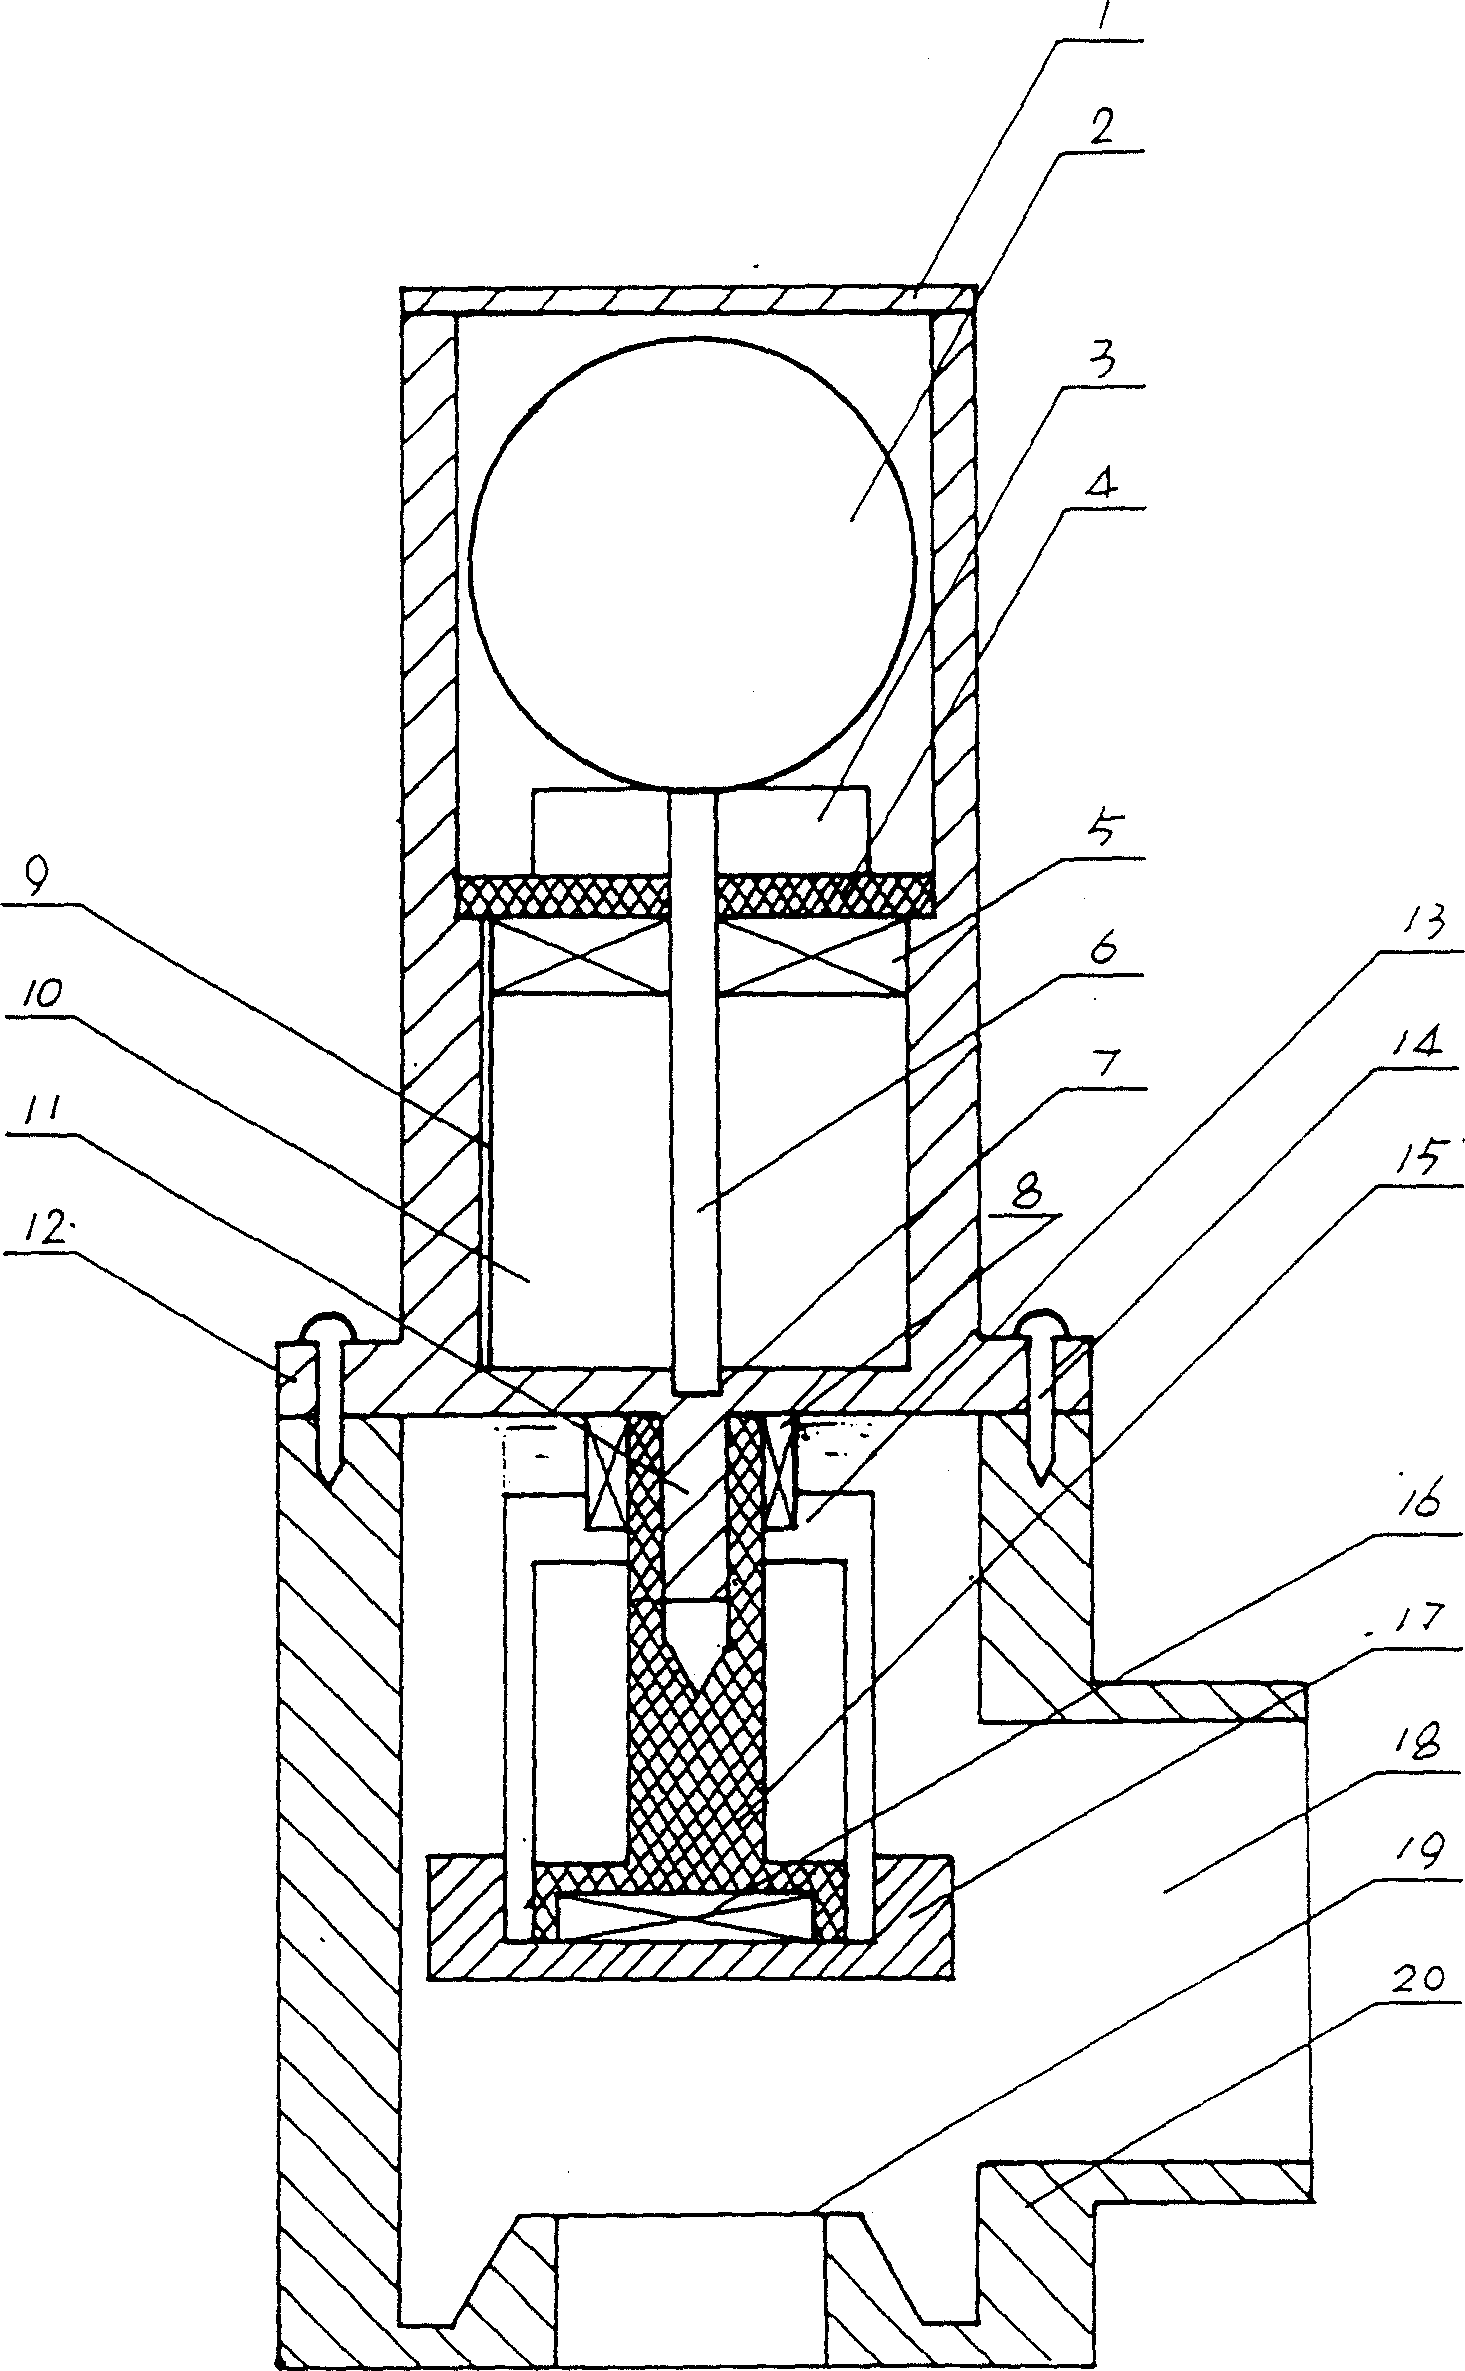 Process for making double-magnetic-repulsion gas safety valve of motor